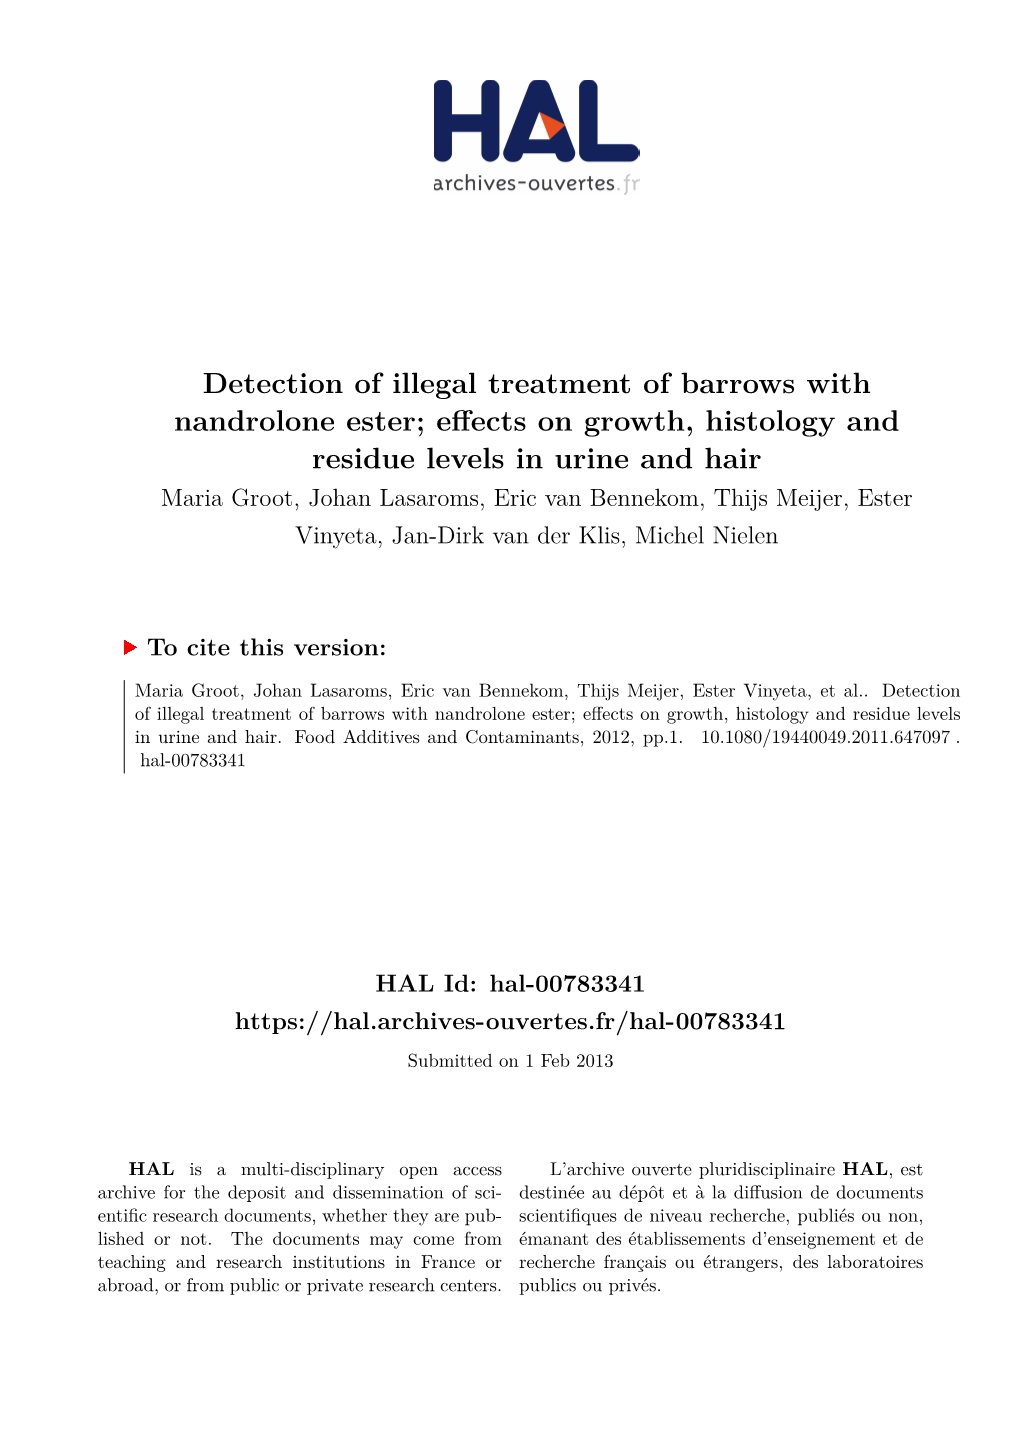 Detection of Illegal Treatment of Barrows with Nandrolone Ester